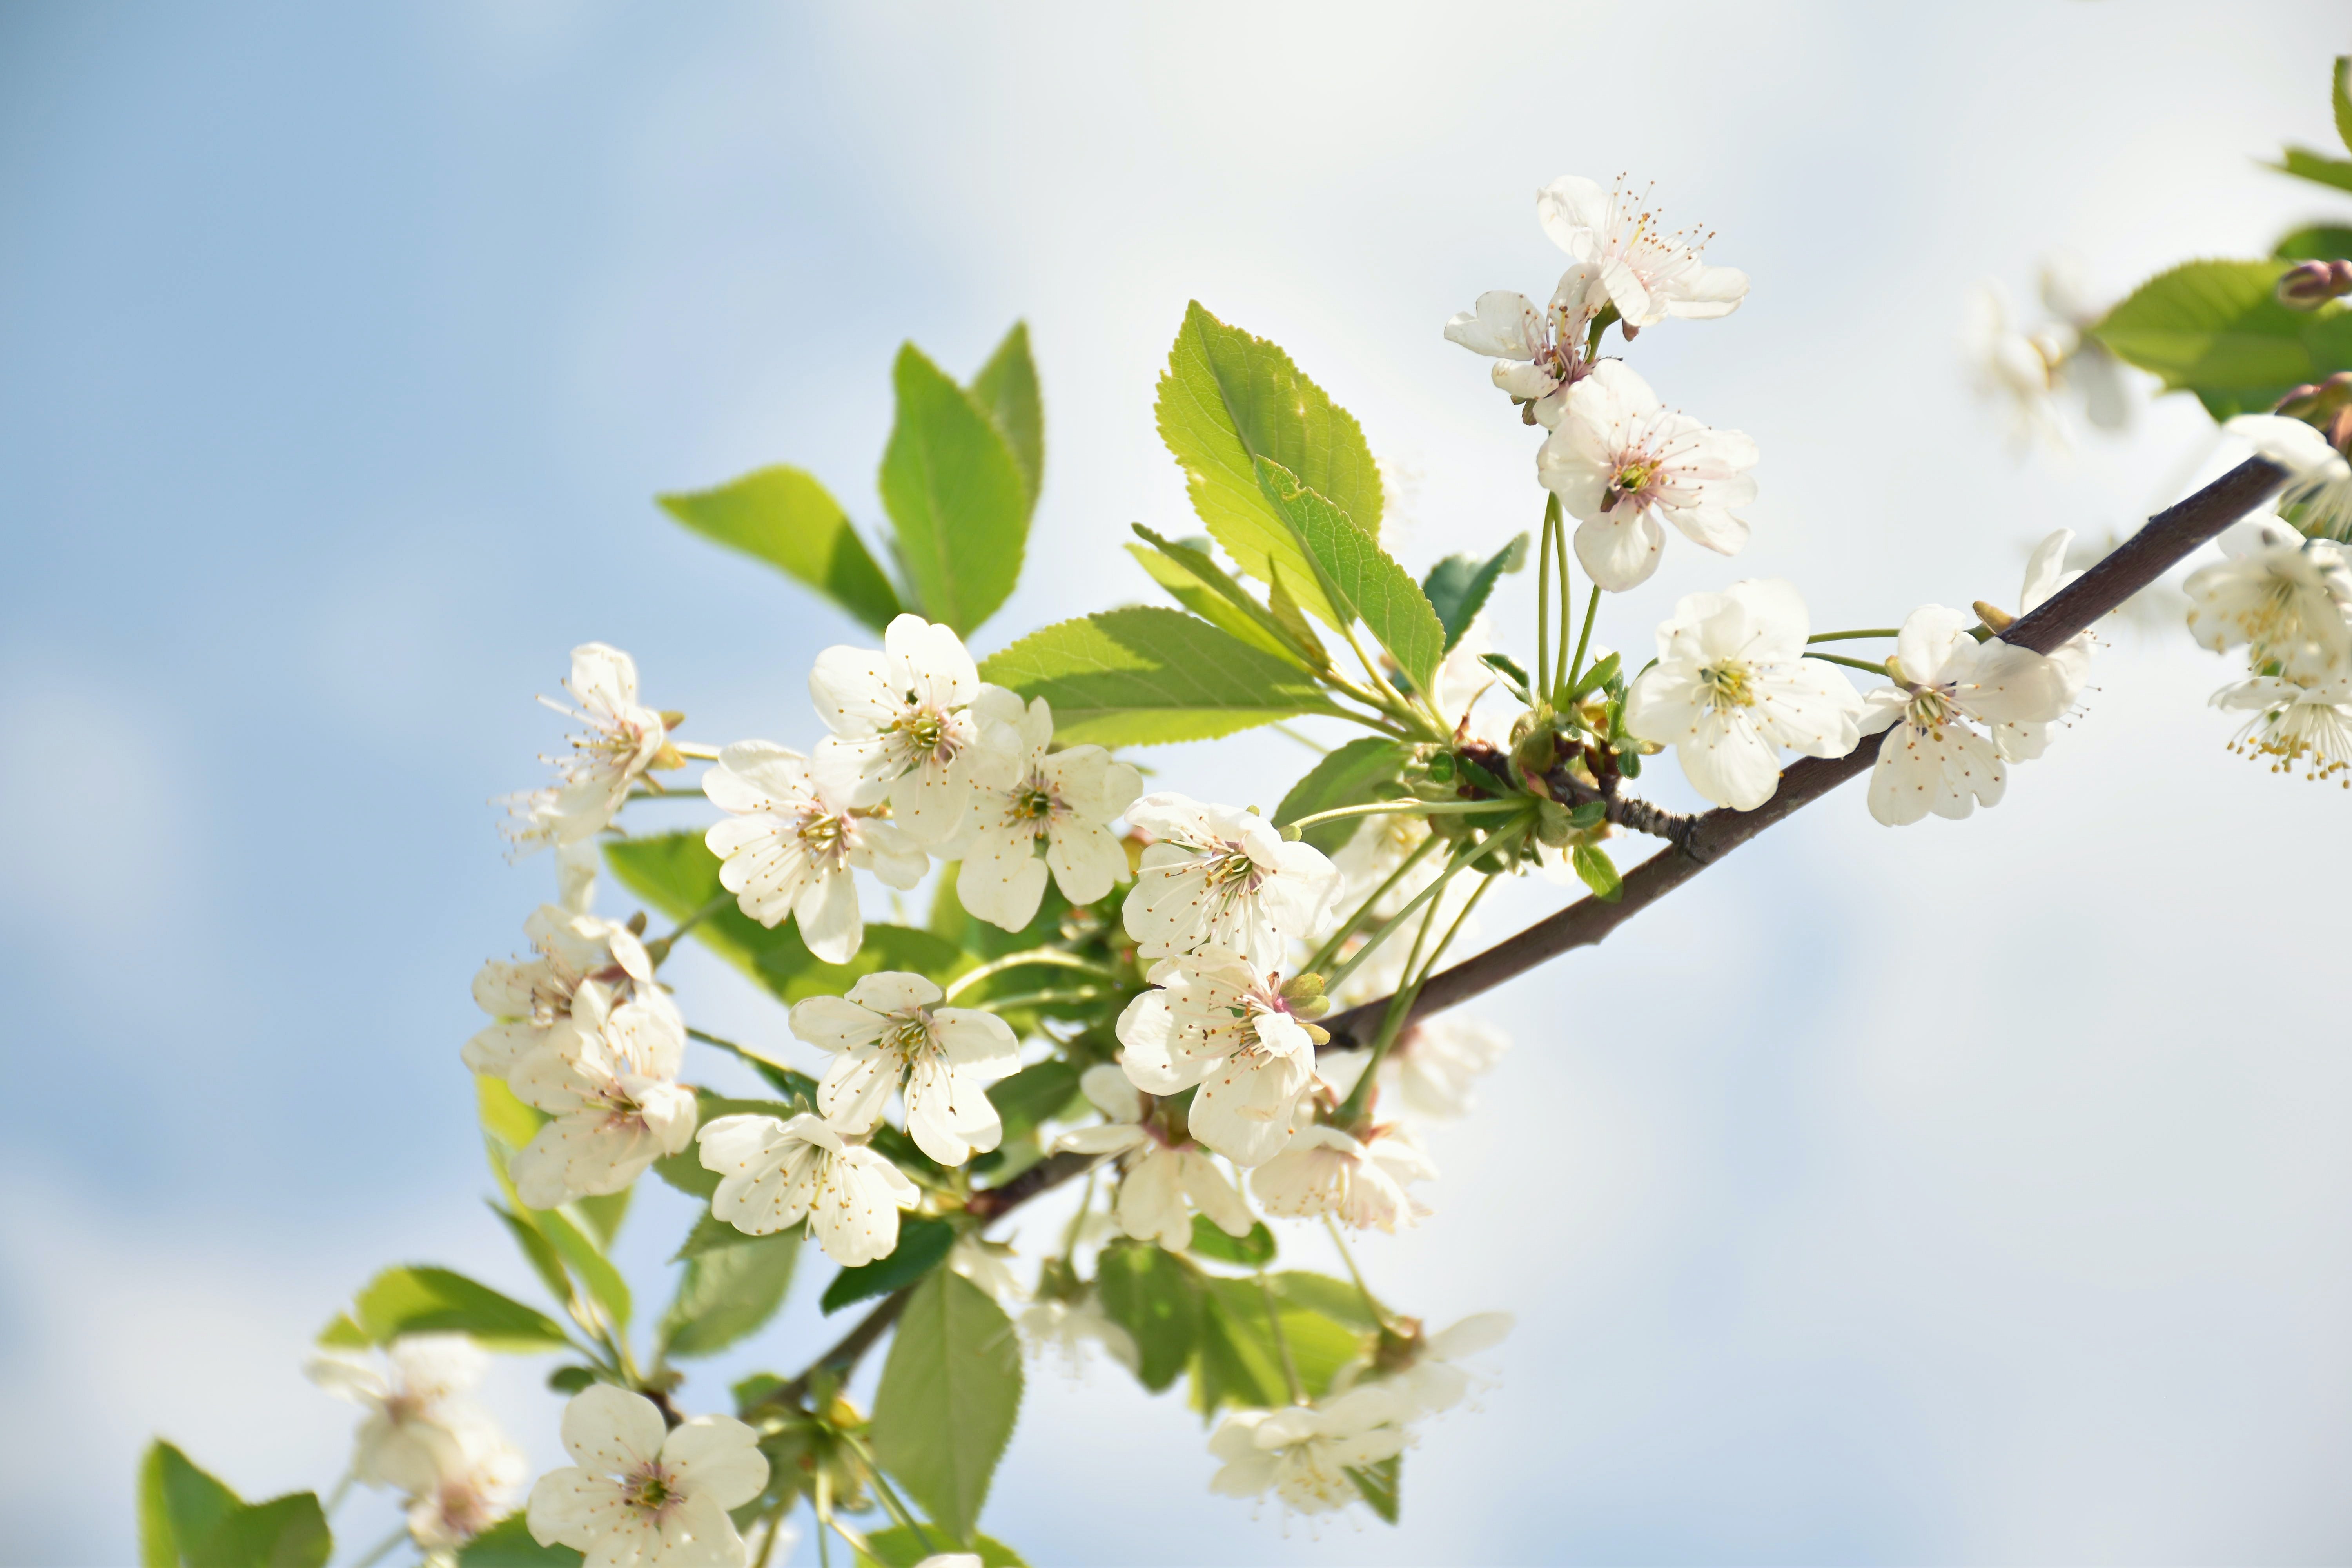 The legend of the flowering almond trees